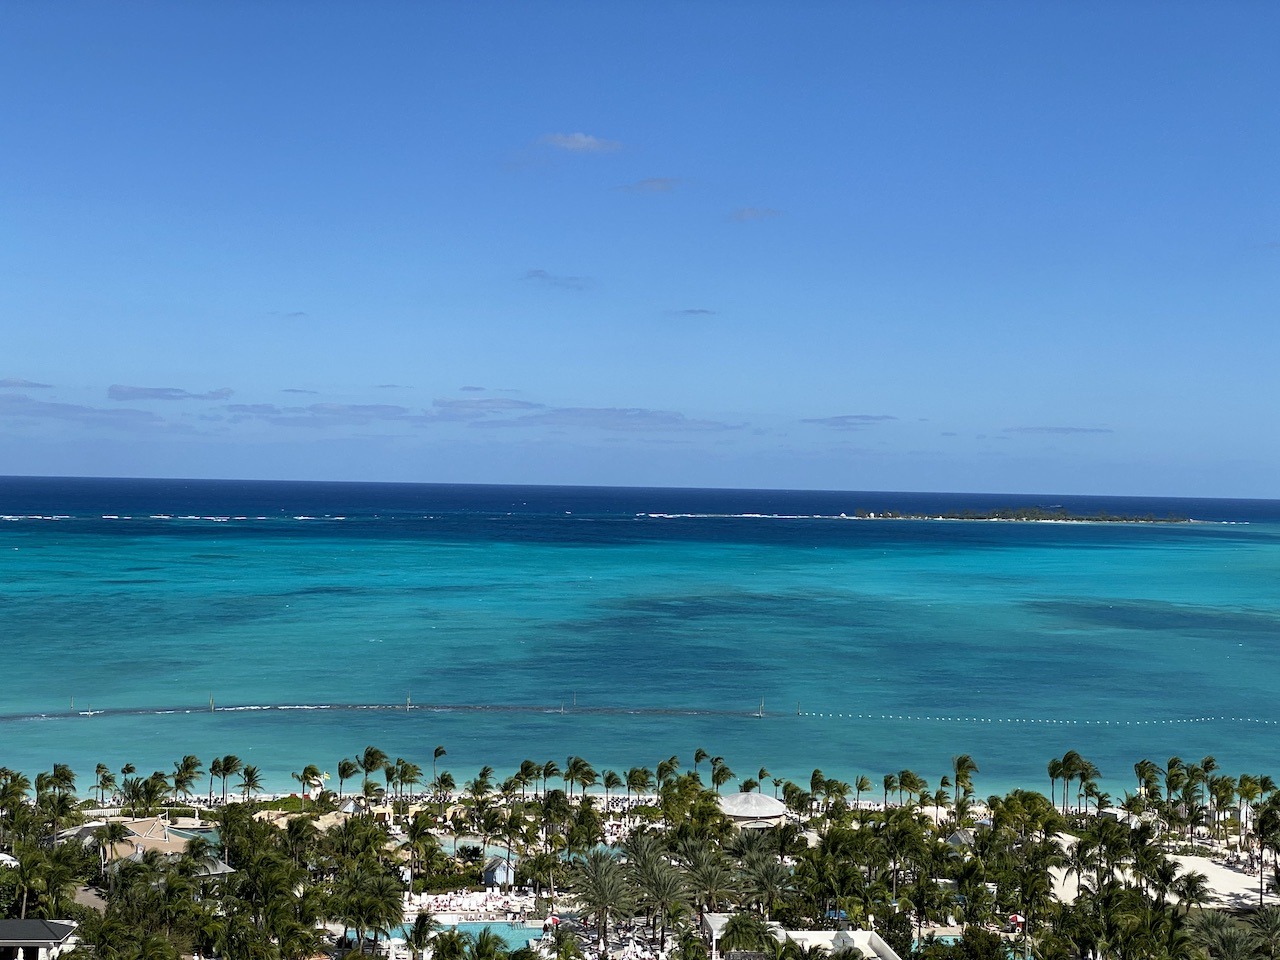 View from the Grand Hyatt Baha Mar suite